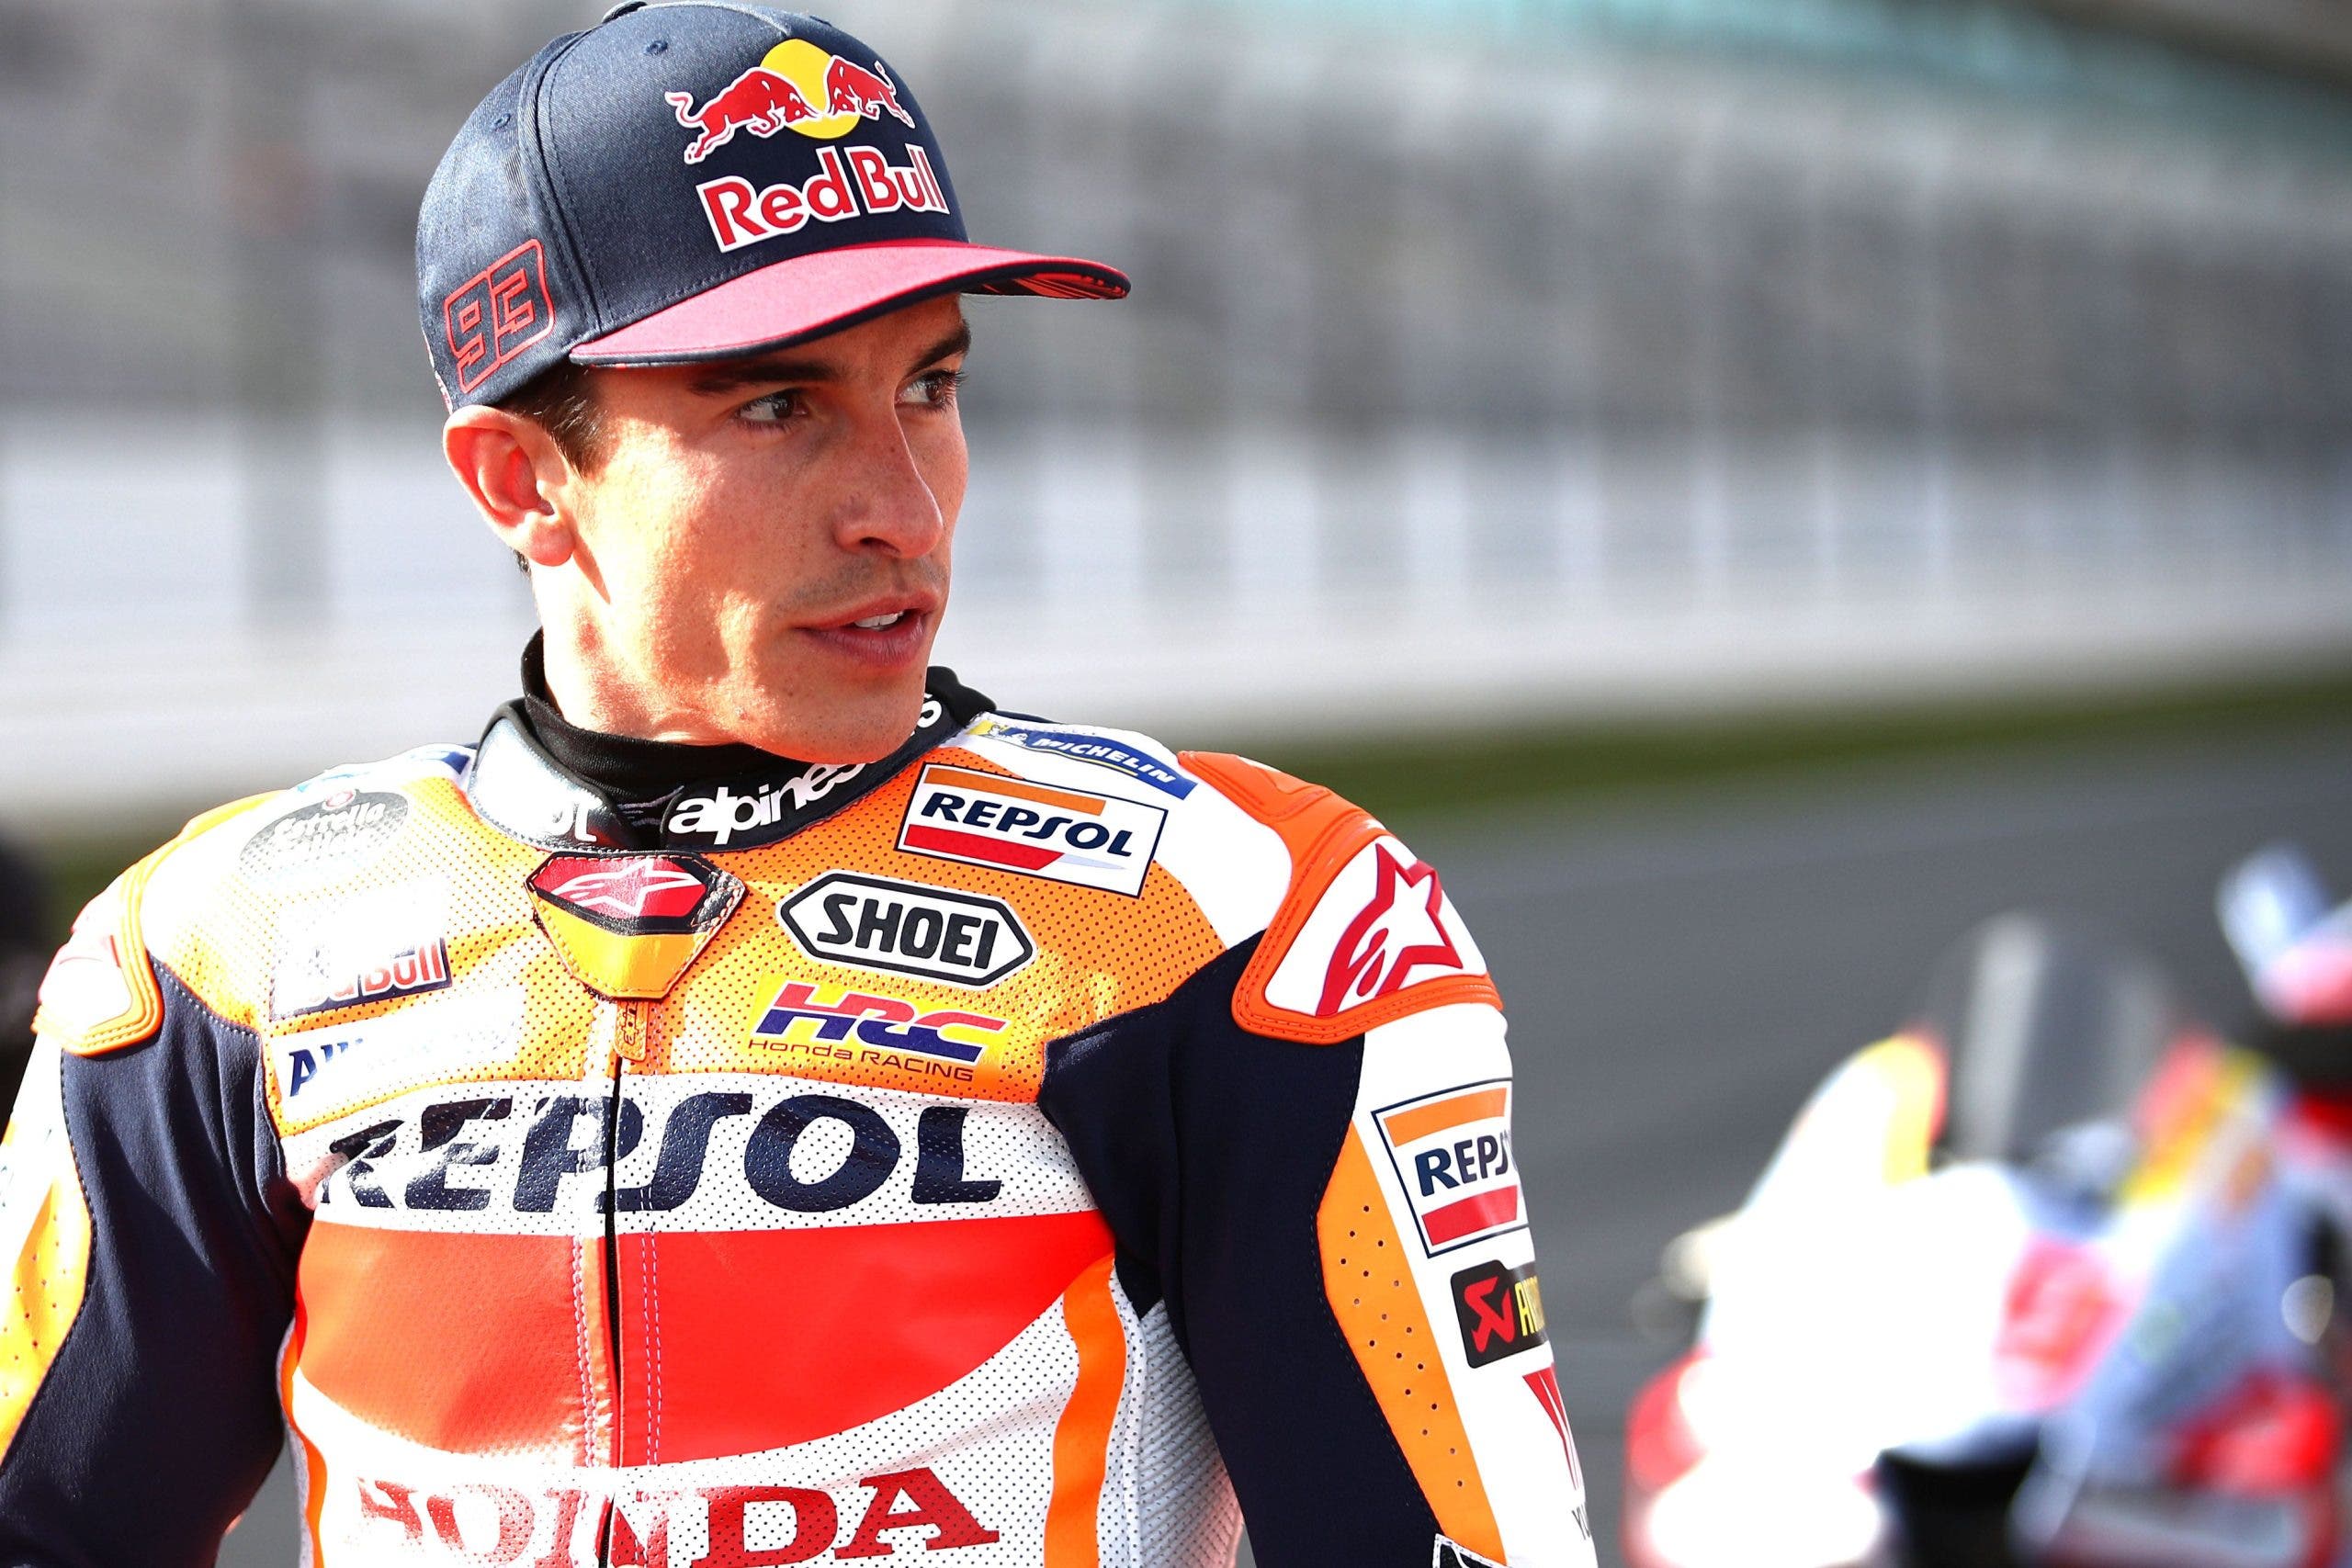 Marc Márquez receives crucial advice that changes everything at Honda Repsol
	
